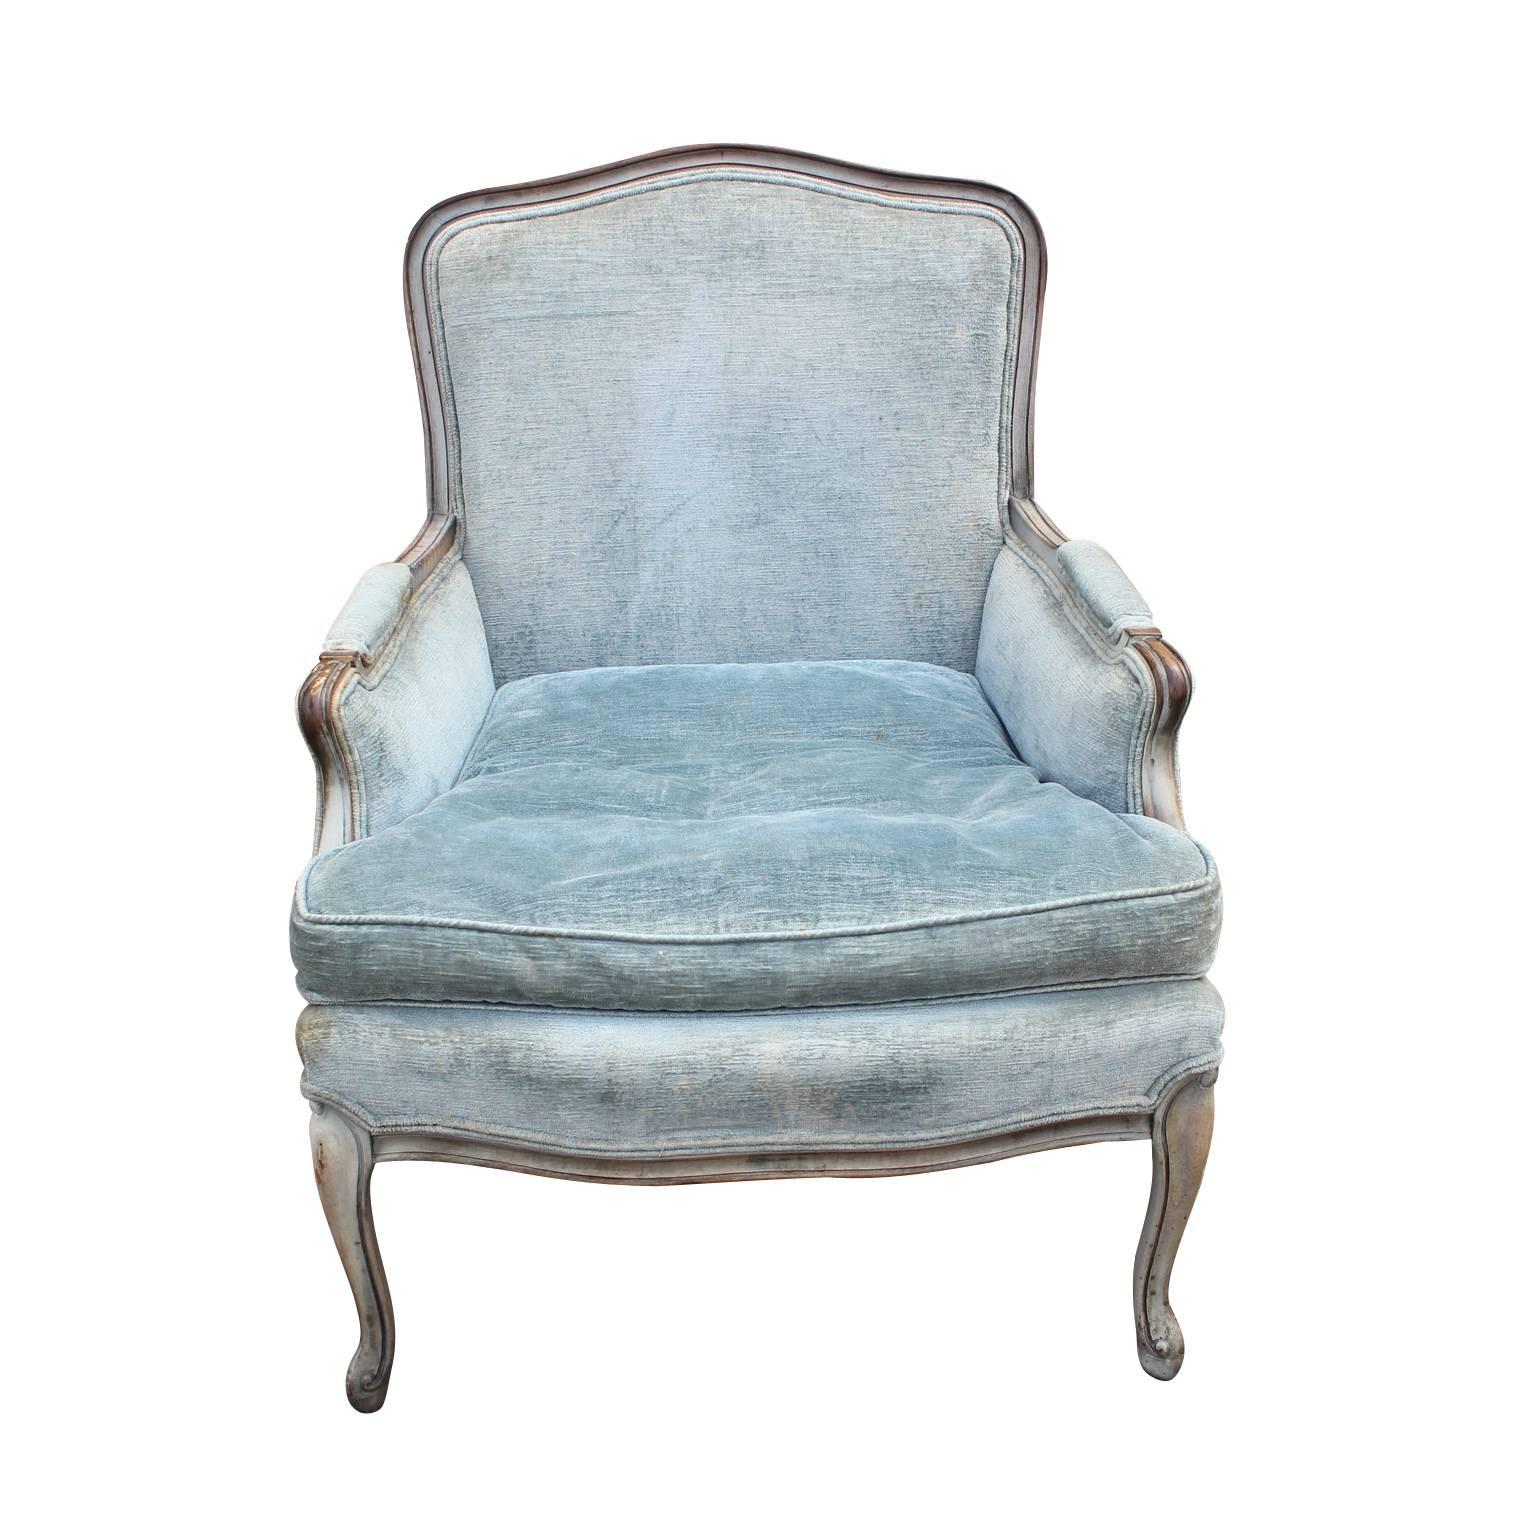 Pair of French Louis XV lounge chairs by Meyer Gunther Martini. These need to be reupholstered but other than that, these are in great vintage condition.